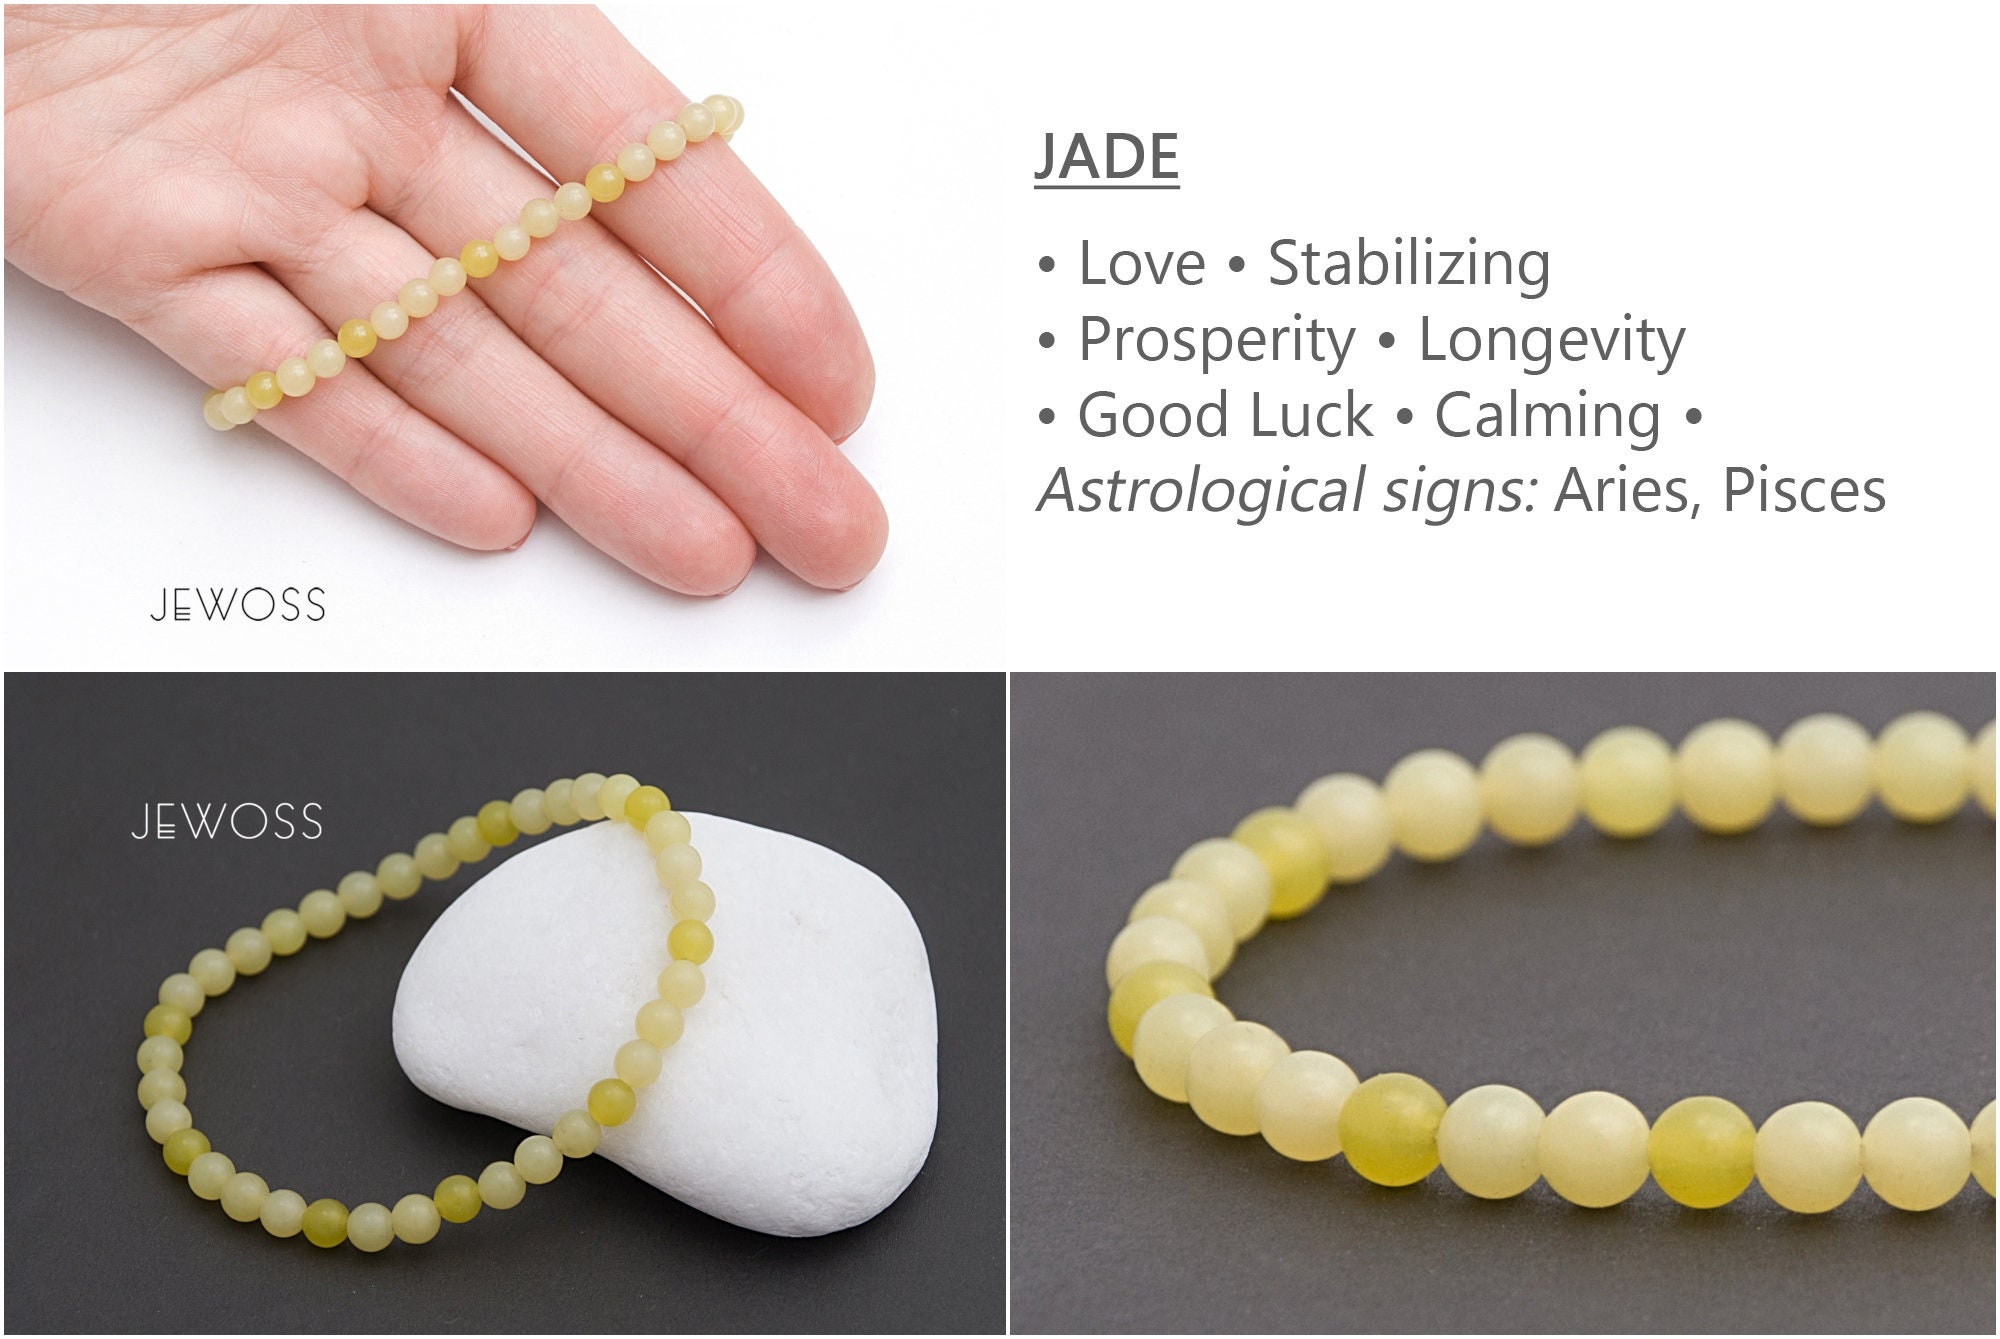 Red Jade: Meanings, Properties and Powers - The Complete Guide